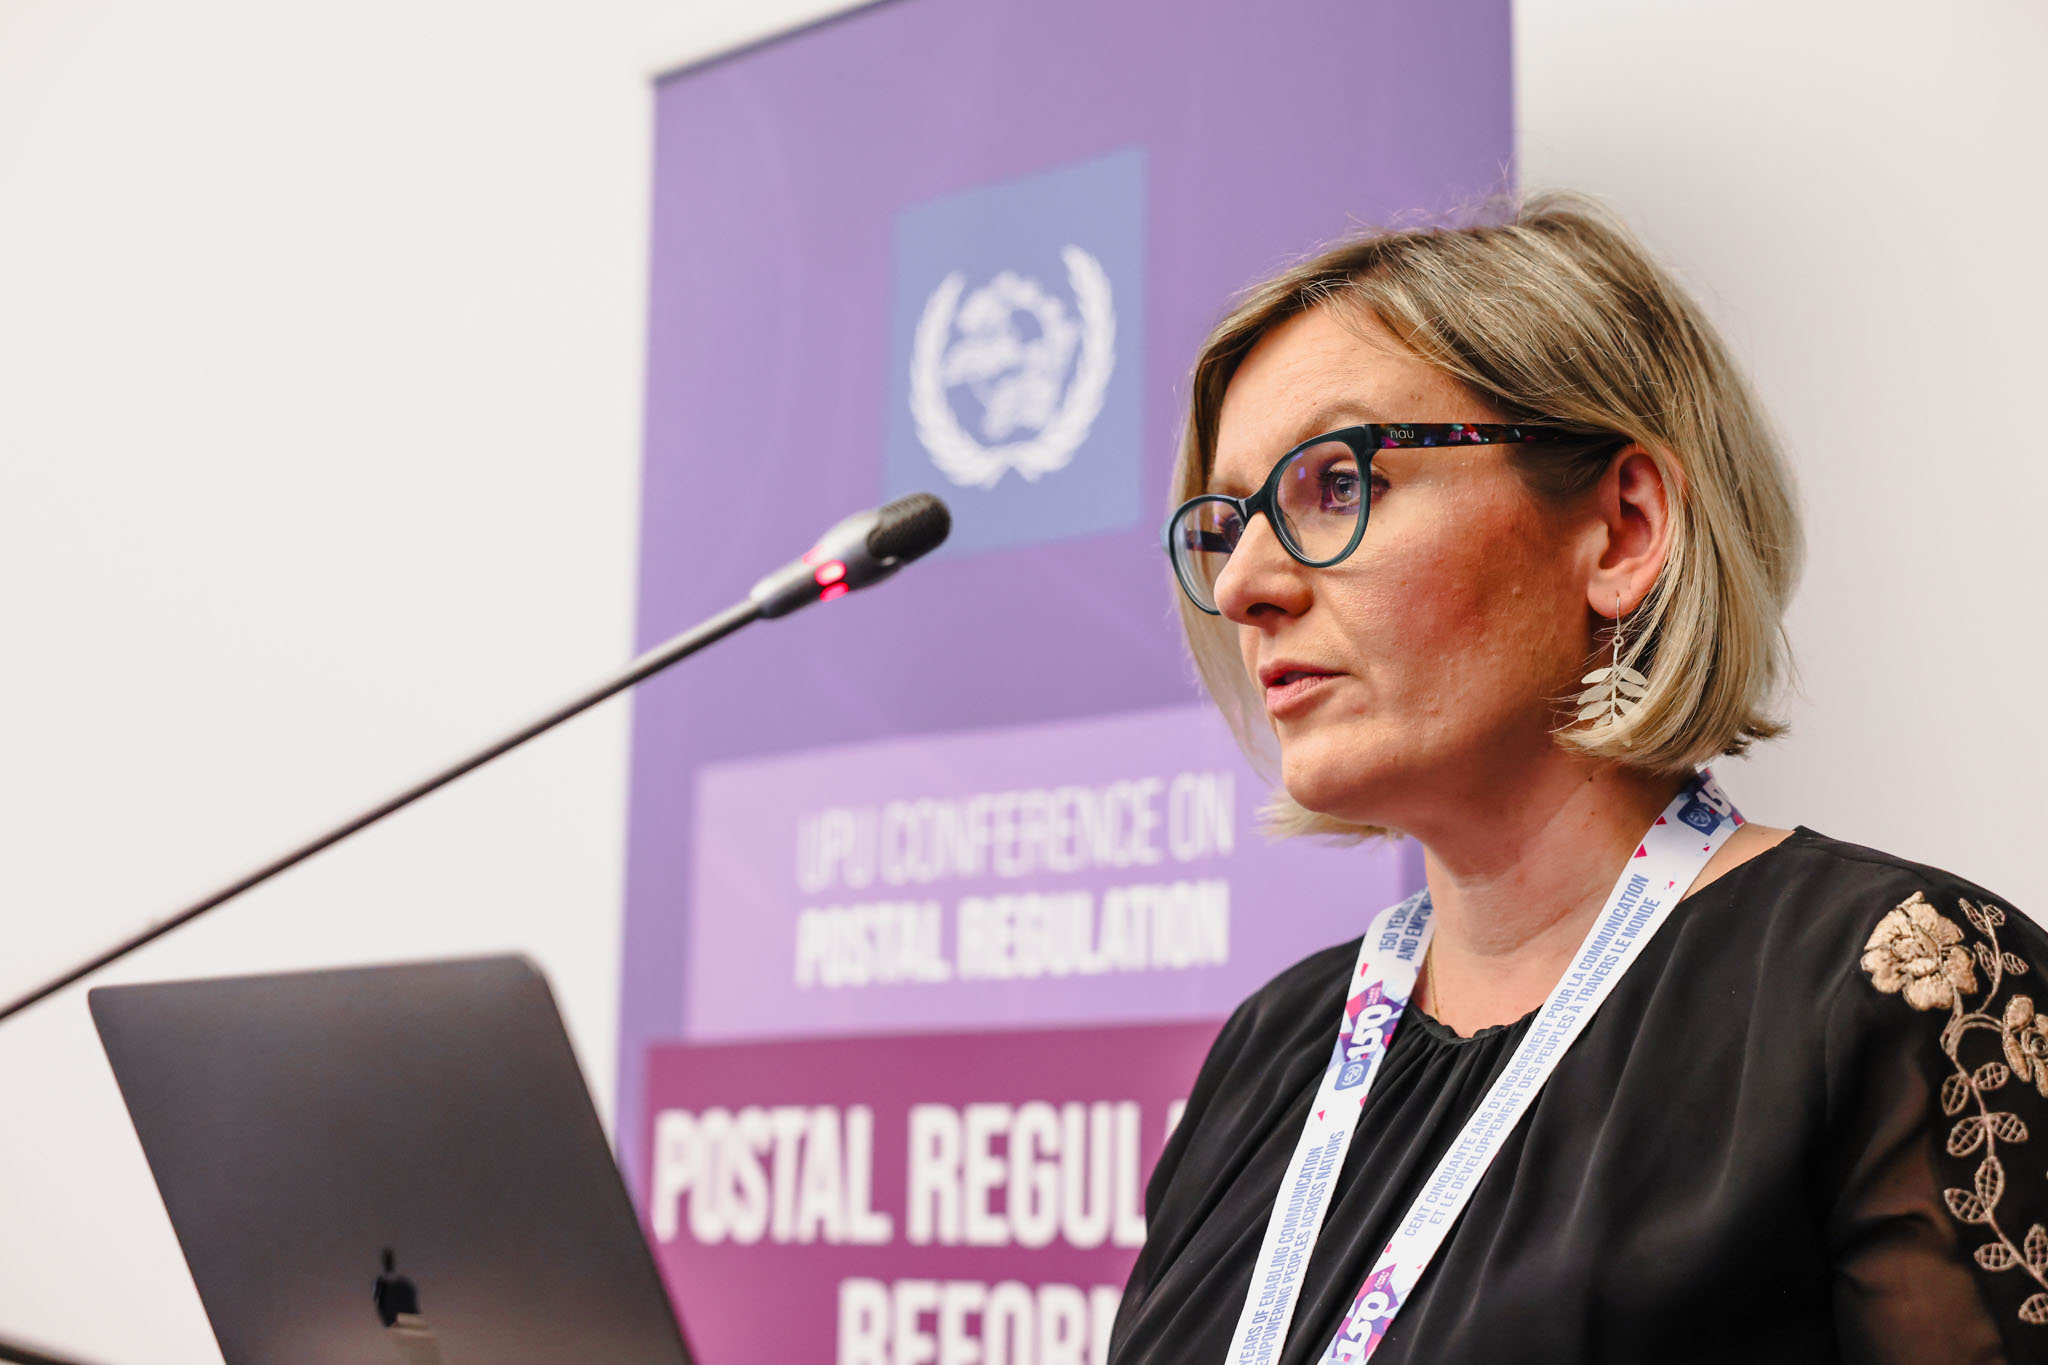 UPU conference on postal reform continues shaping postal services with global regulatory insights